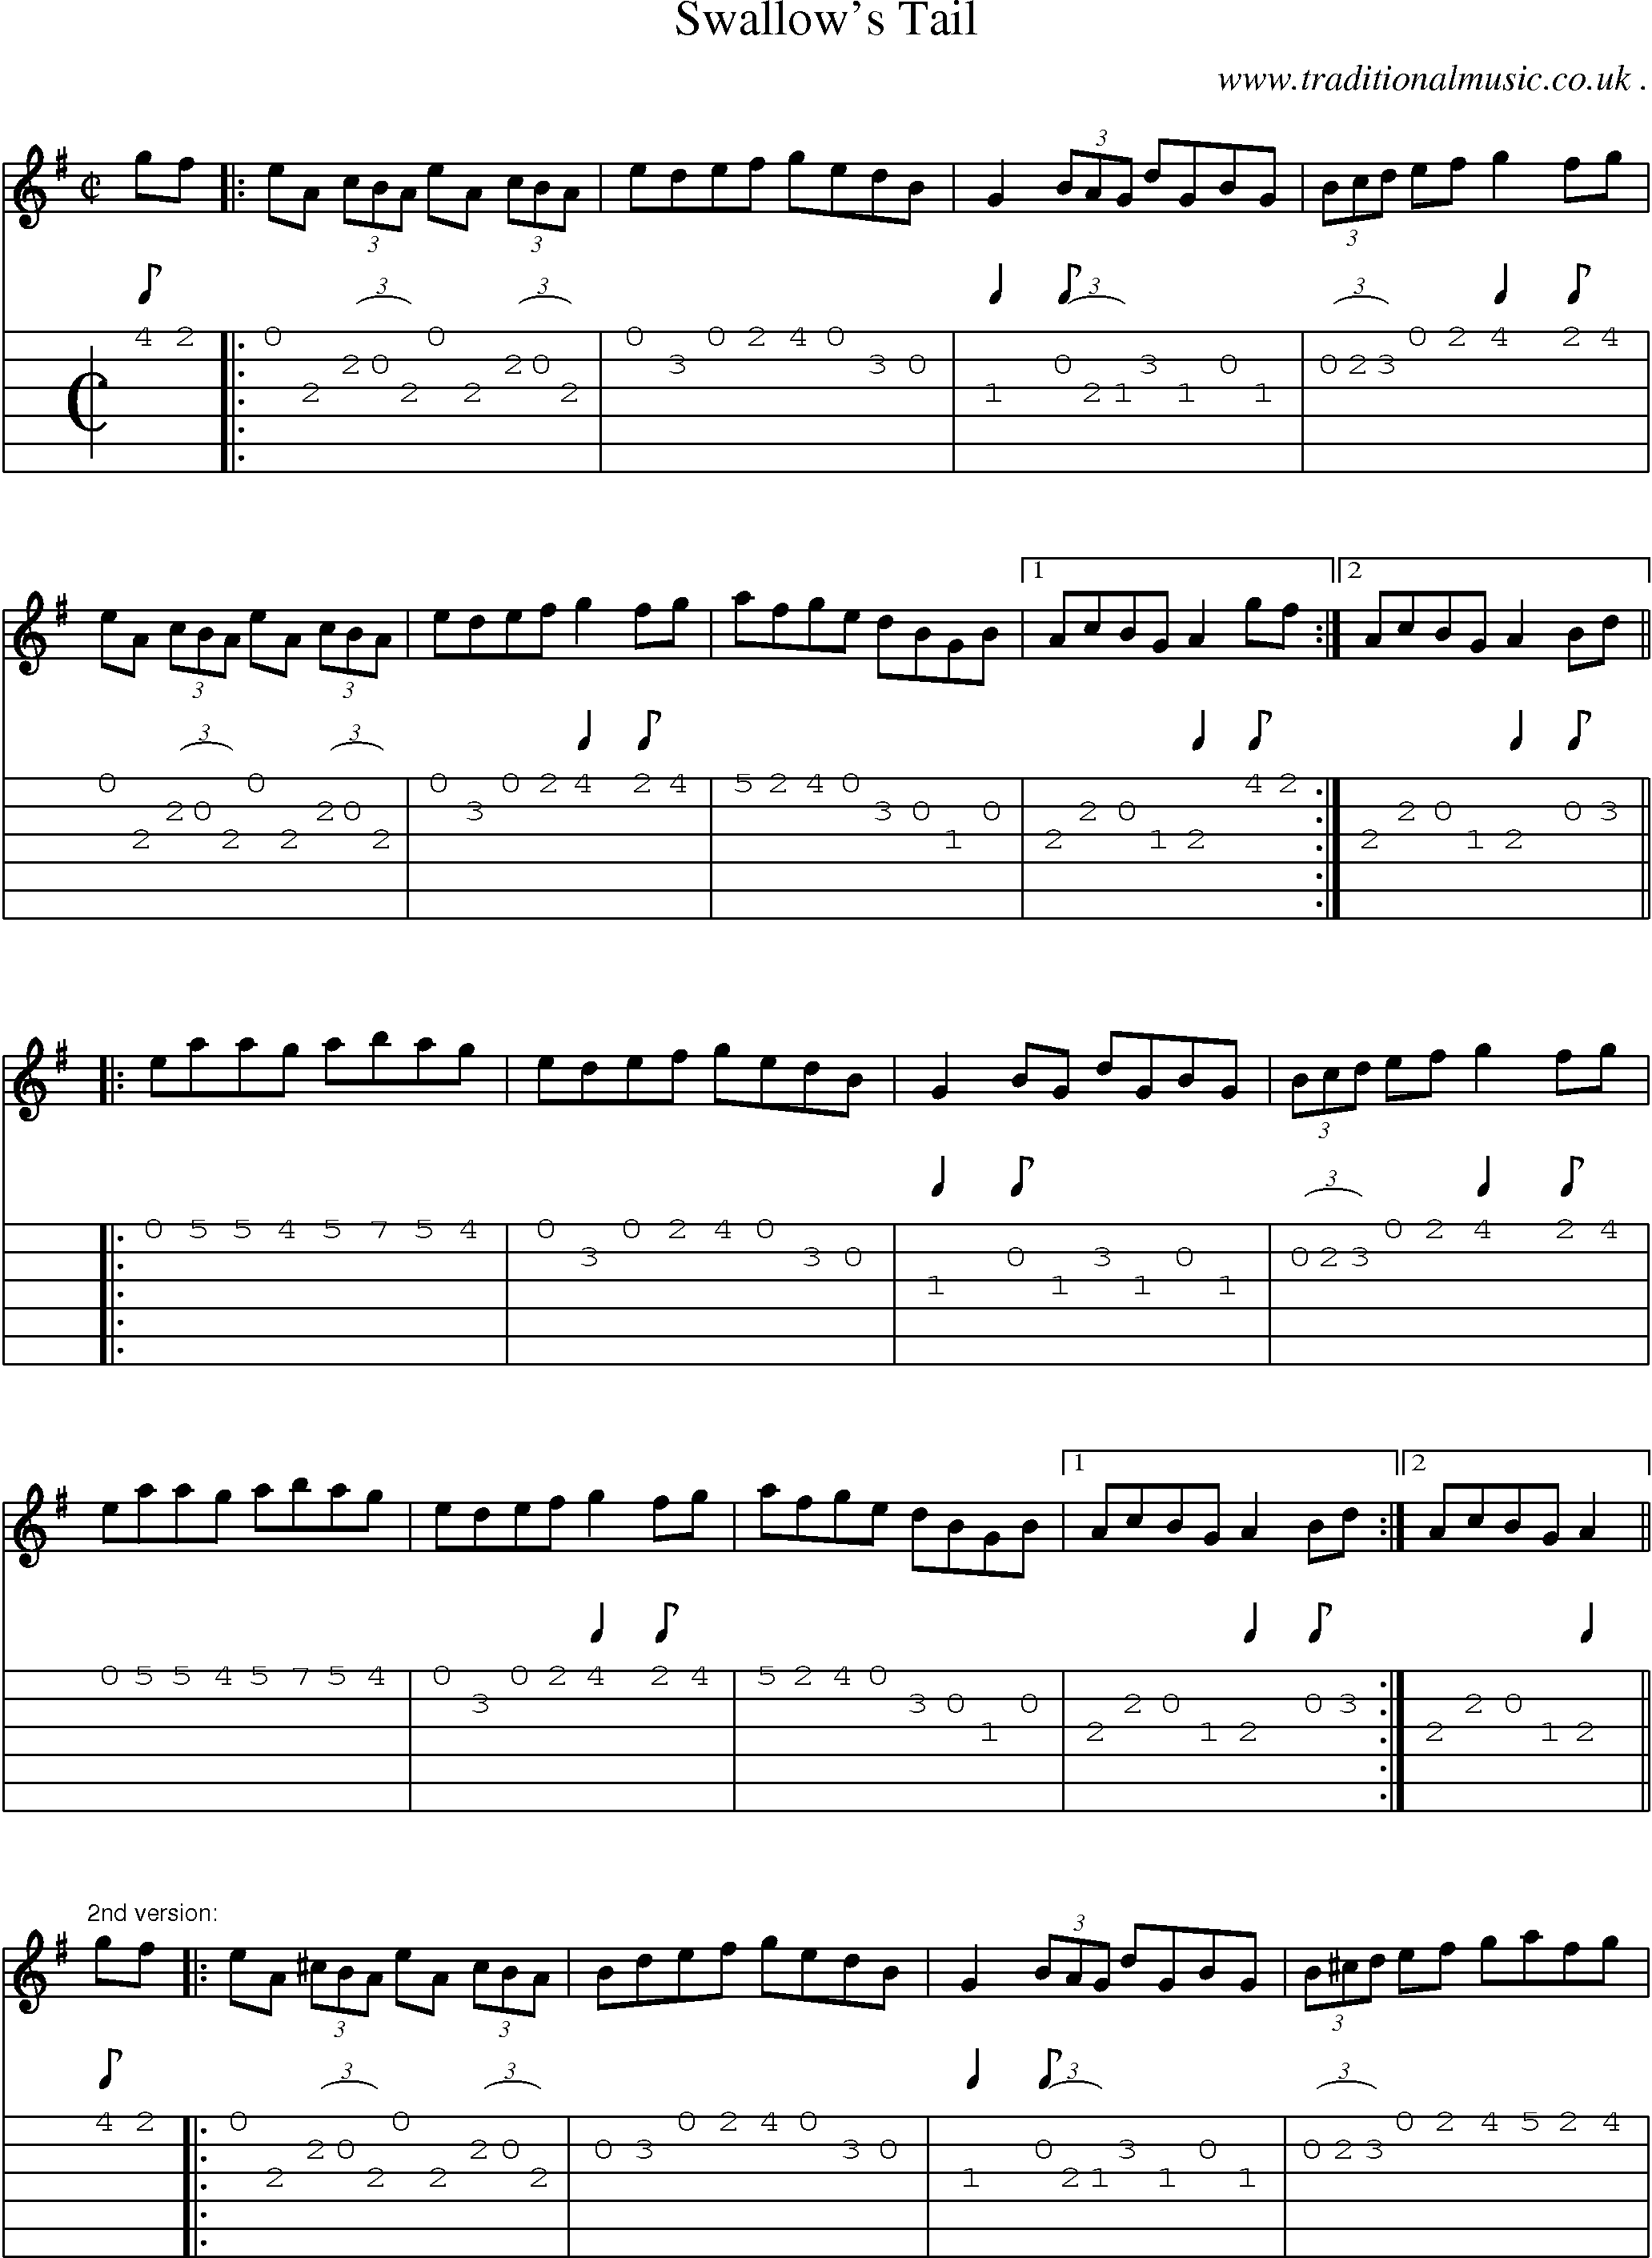 Sheet-Music and Guitar Tabs for Swallows Tail